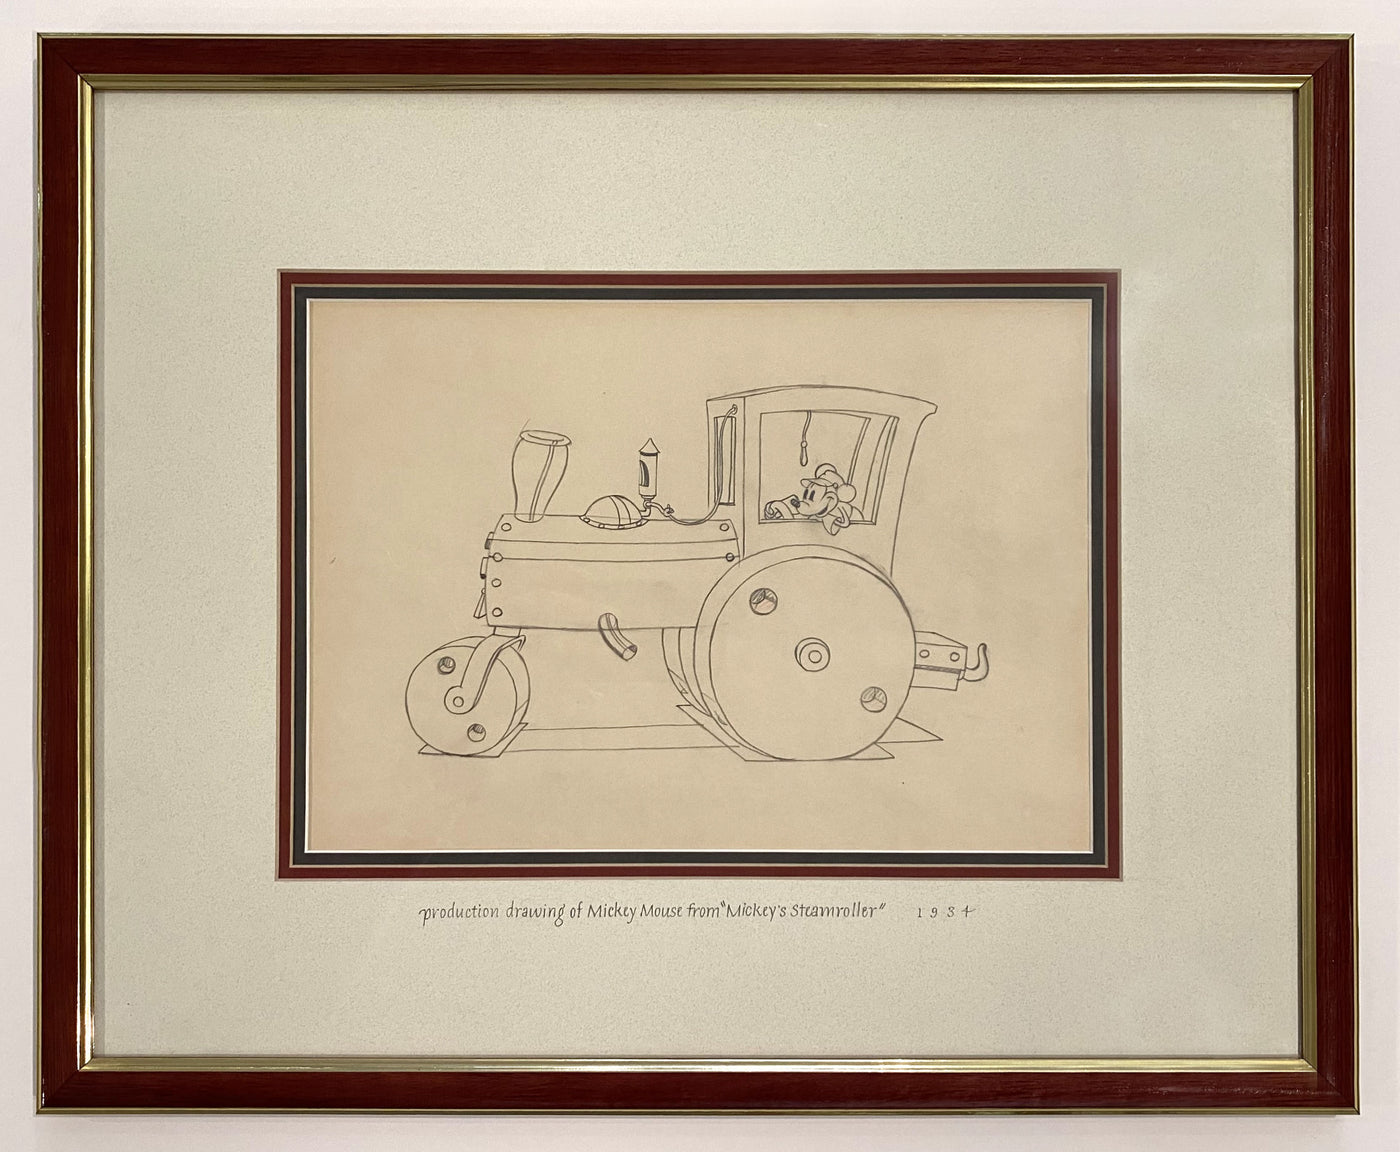 Original Walt Disney Production Drawing of Mickey Mouse from Mickey's Steamroller (1934)